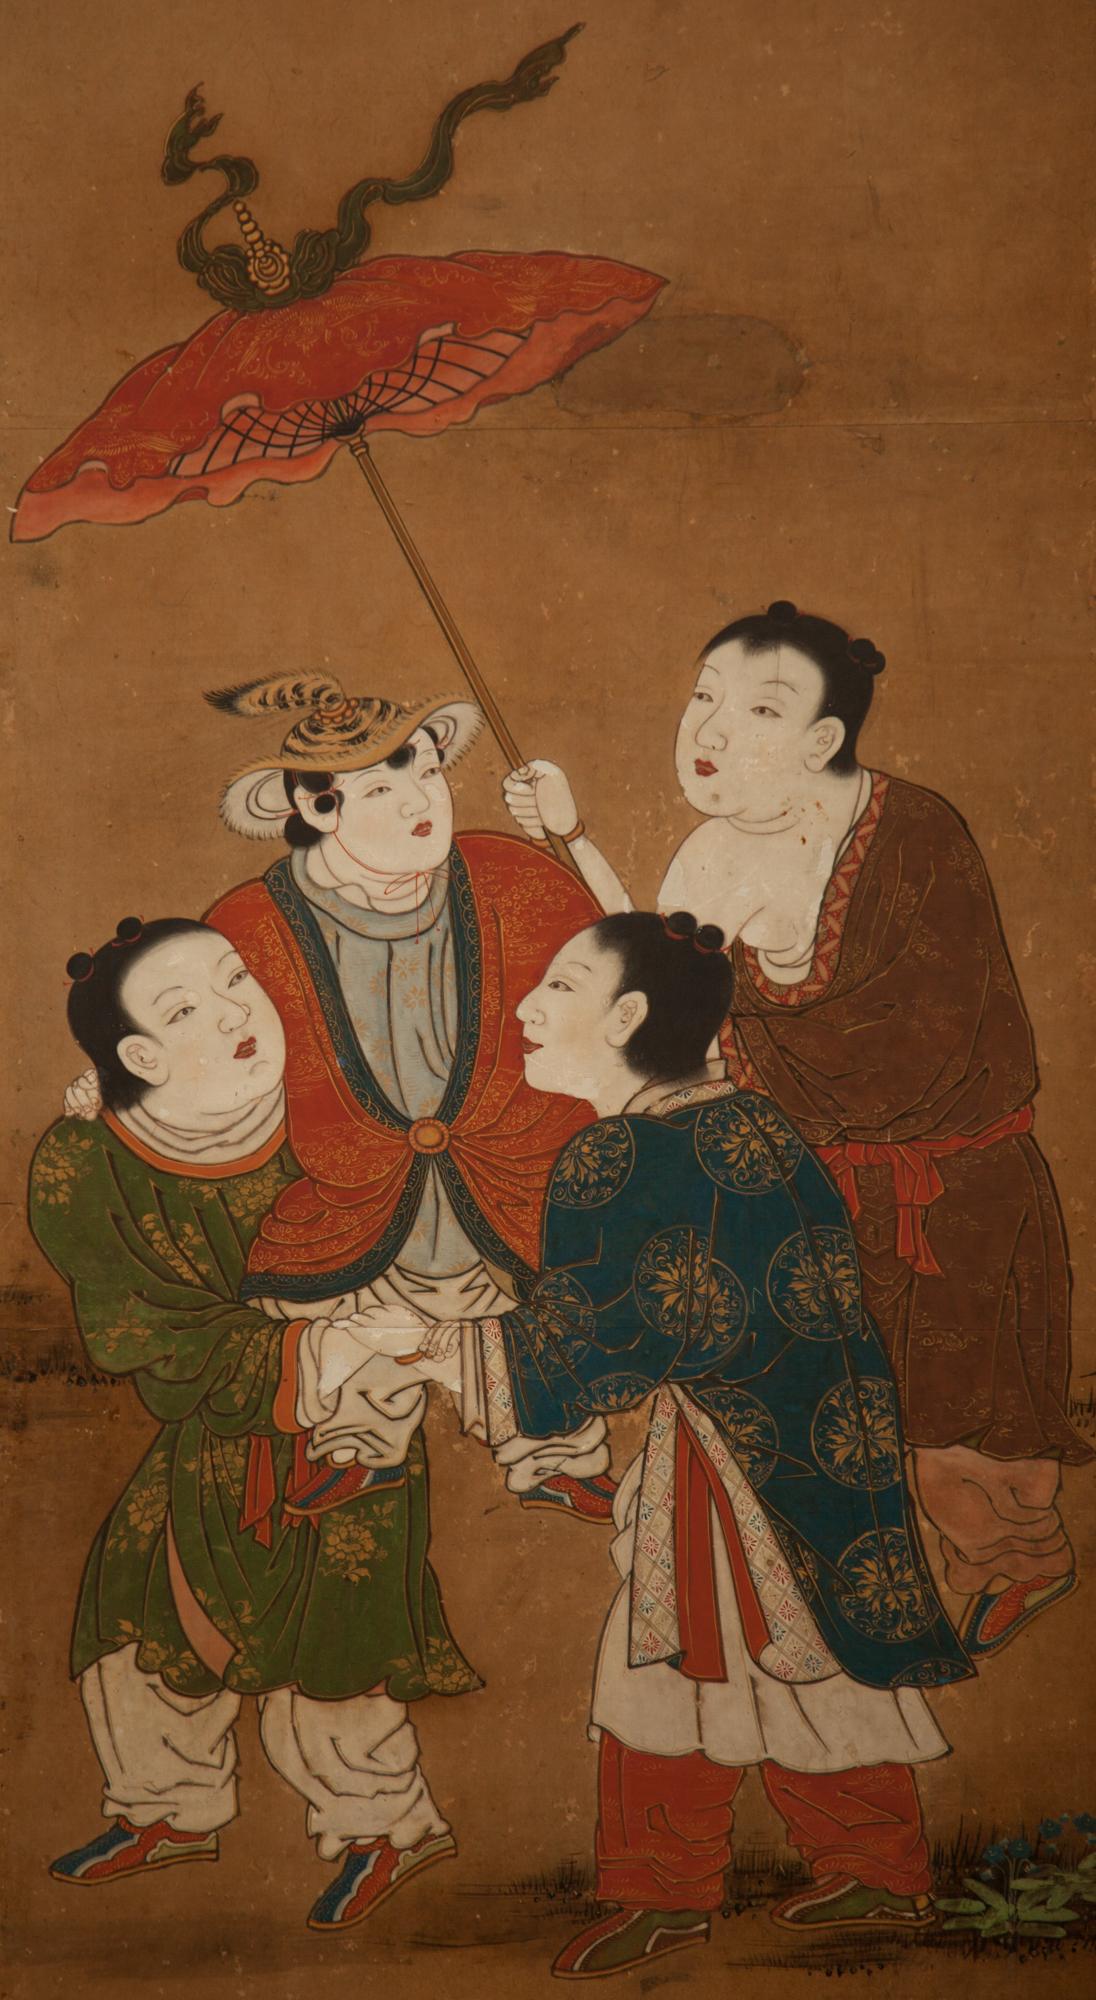 Children at play in a Chinese palace garden, a favorite subject of Japanese painters. Kano School painting in mineral pigments on mulberry paper with silk brocade border. Original bronze/chrysanthemum hardware may suggest it was in an important